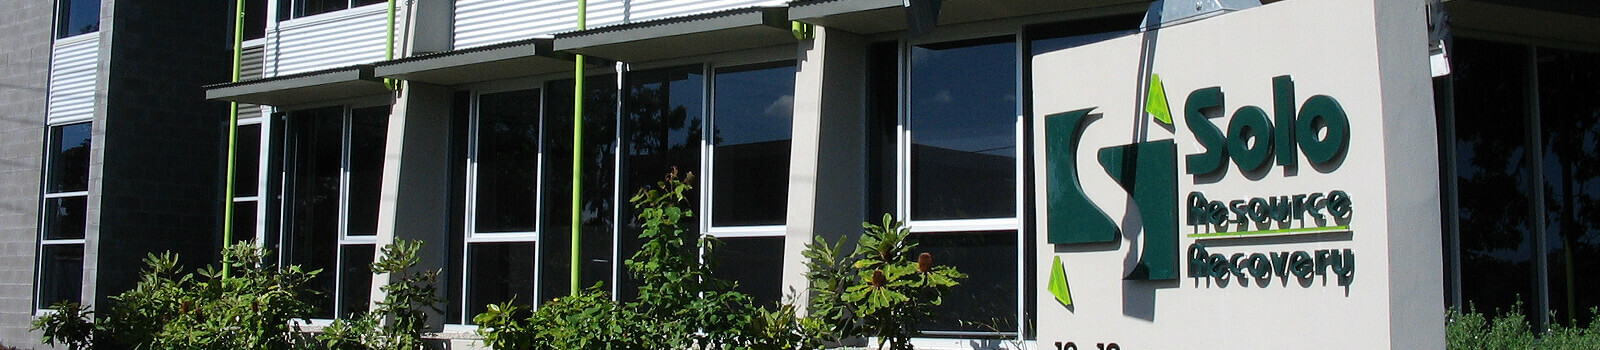 Glass windows on commercial building